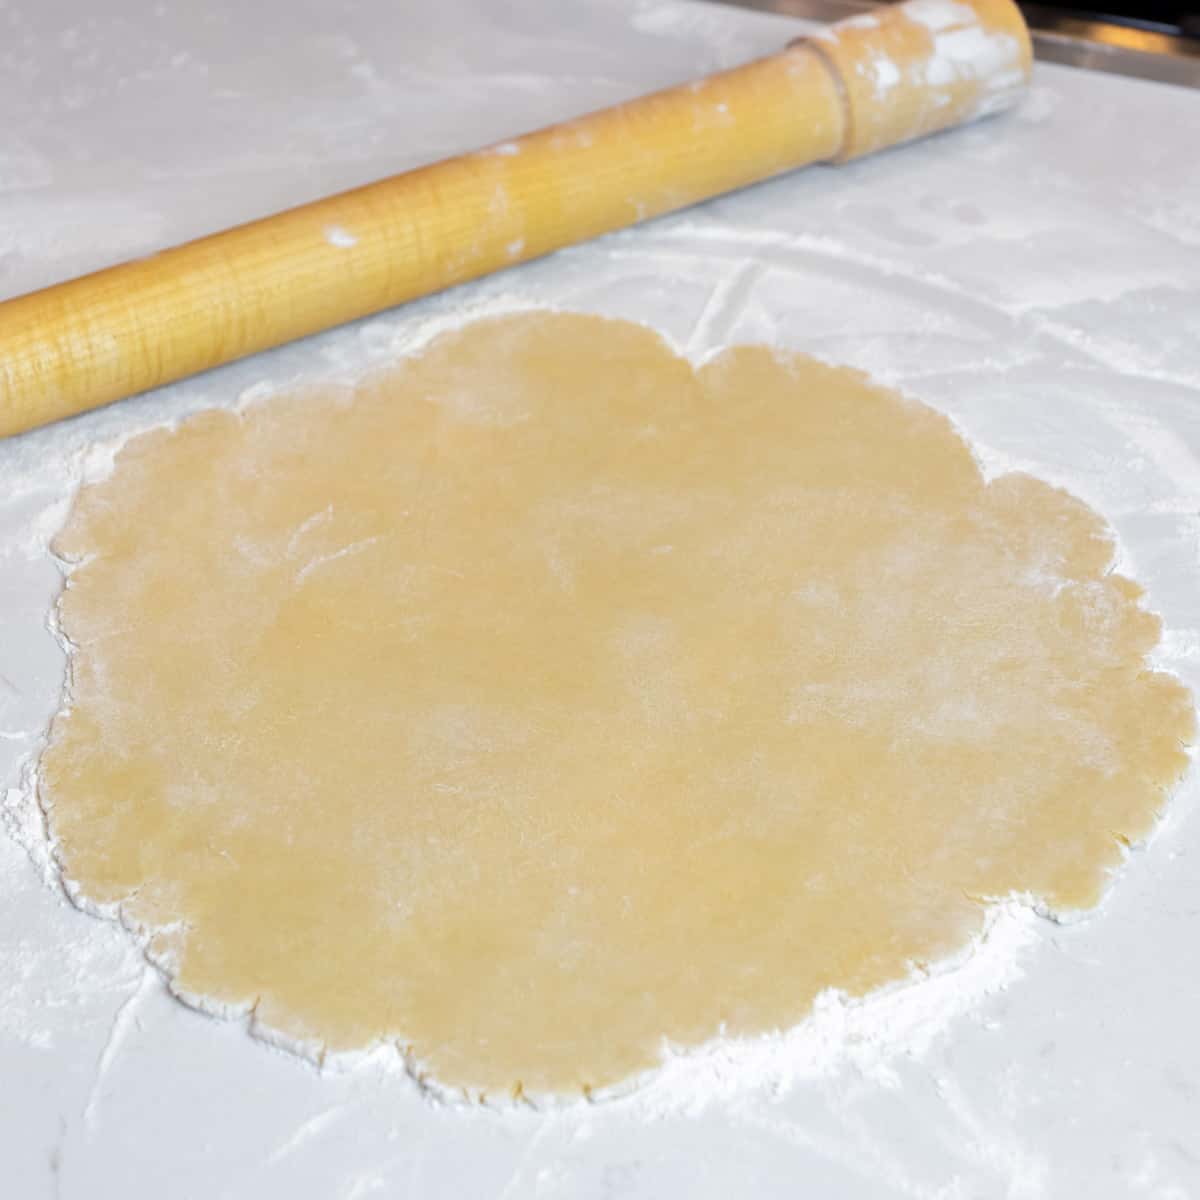 Pie crust dough rolled out on a floured surface.